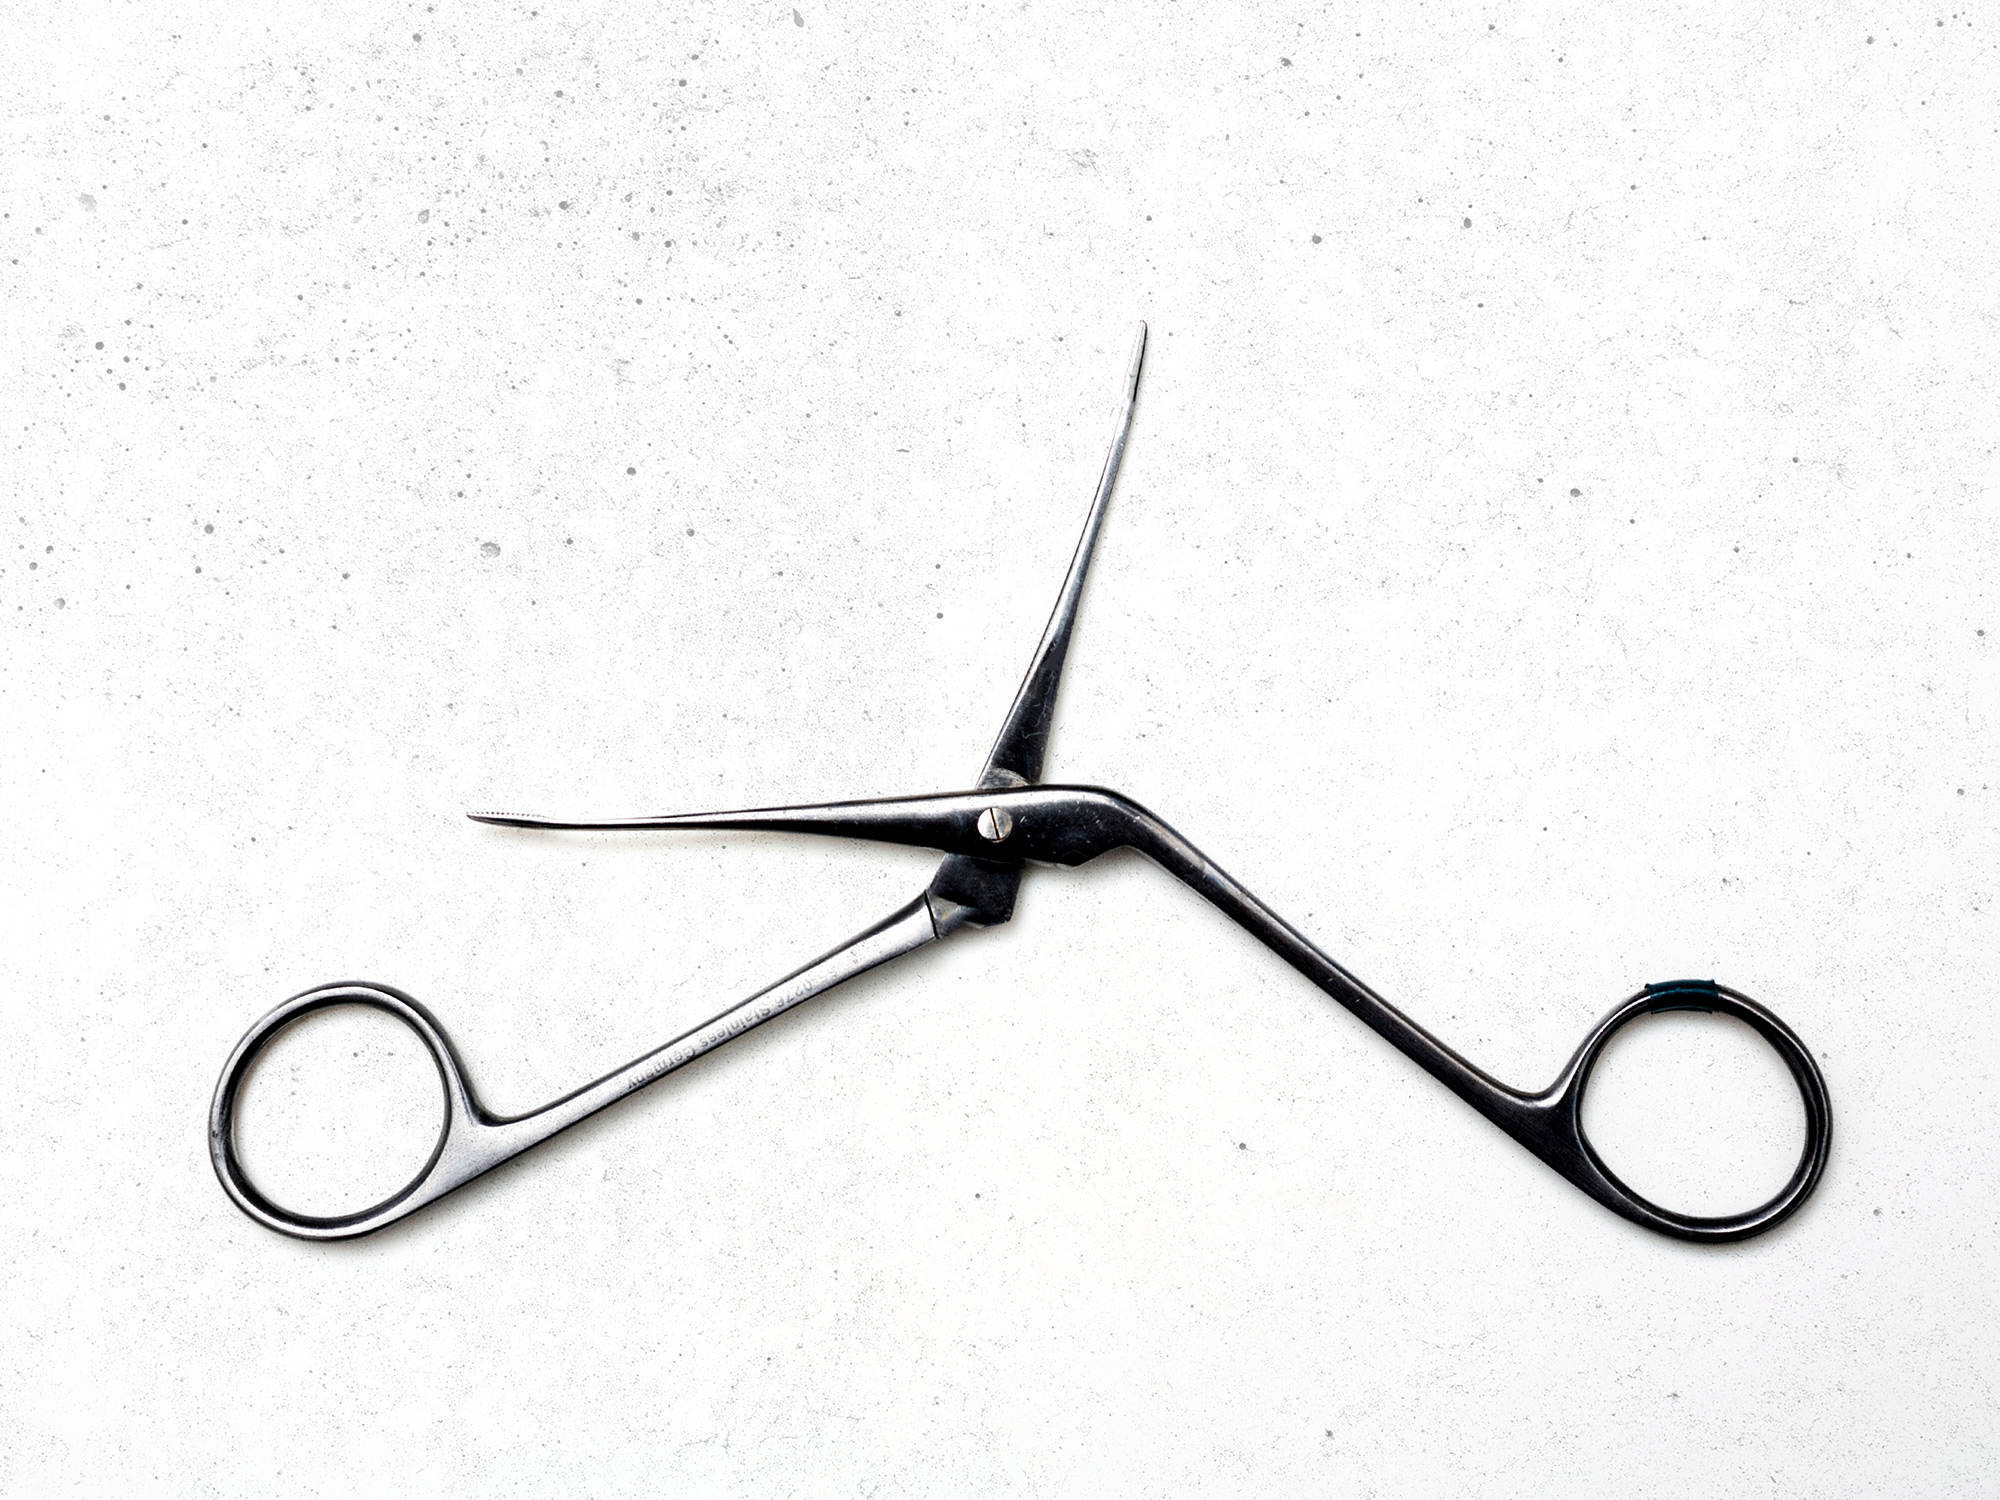 A pair of medical grade scissors photographed by Houston medical photographer, Todd Spoth.